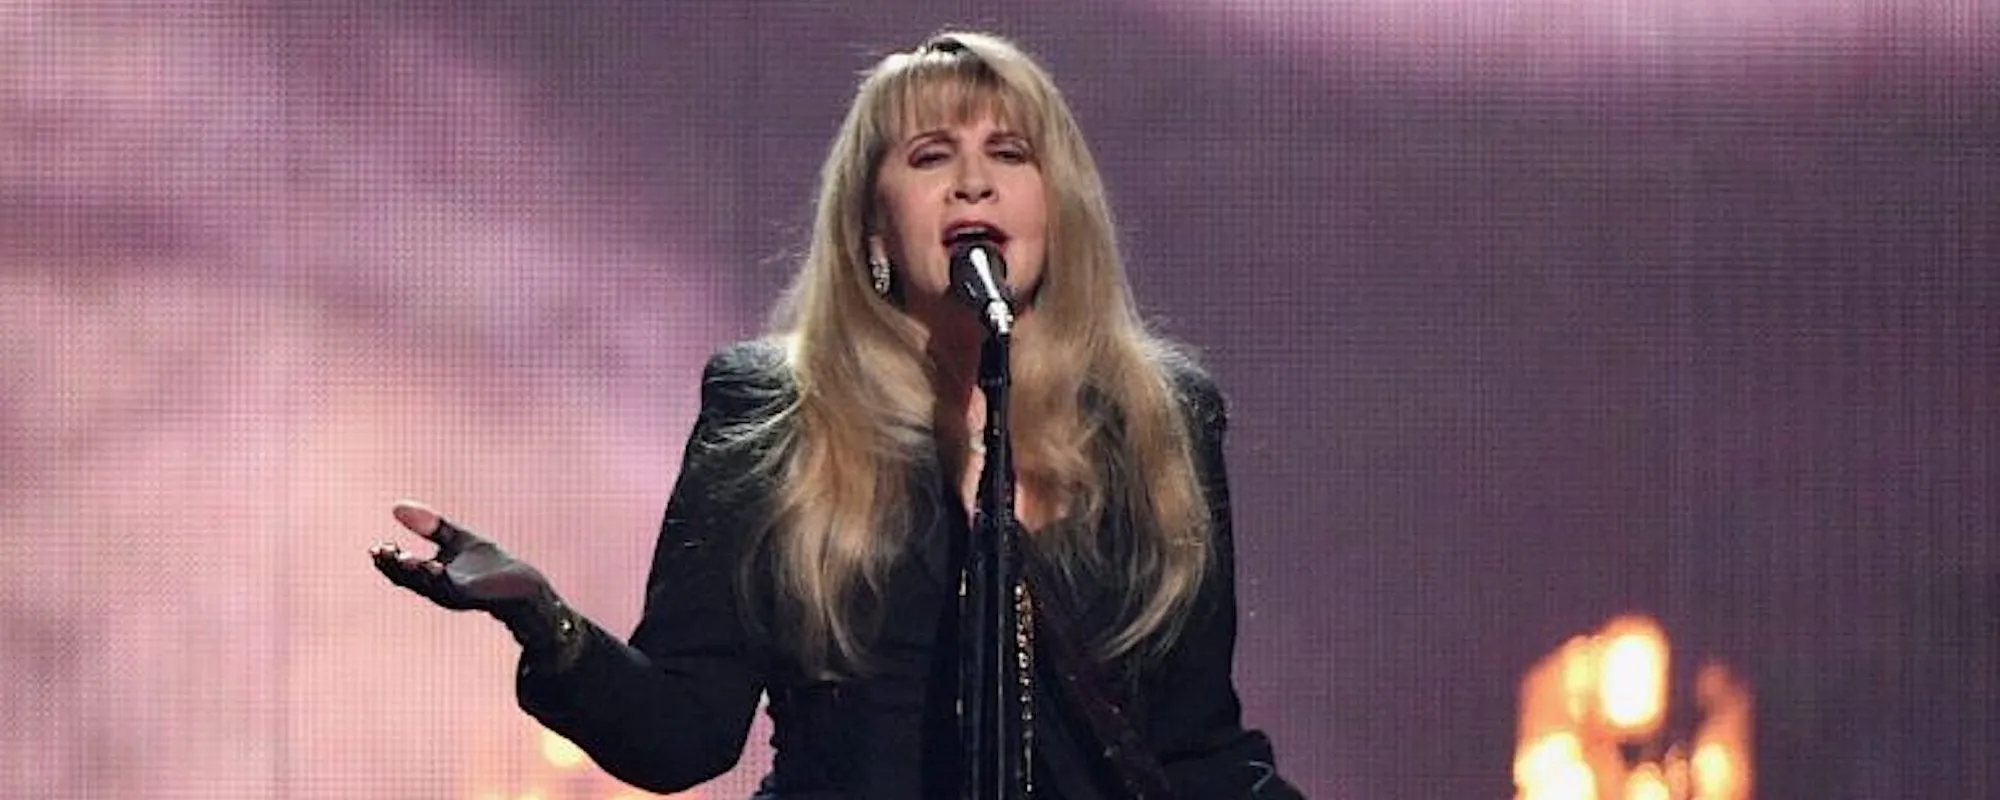 New Comic Book Series About Stevie Nicks Has Been Published